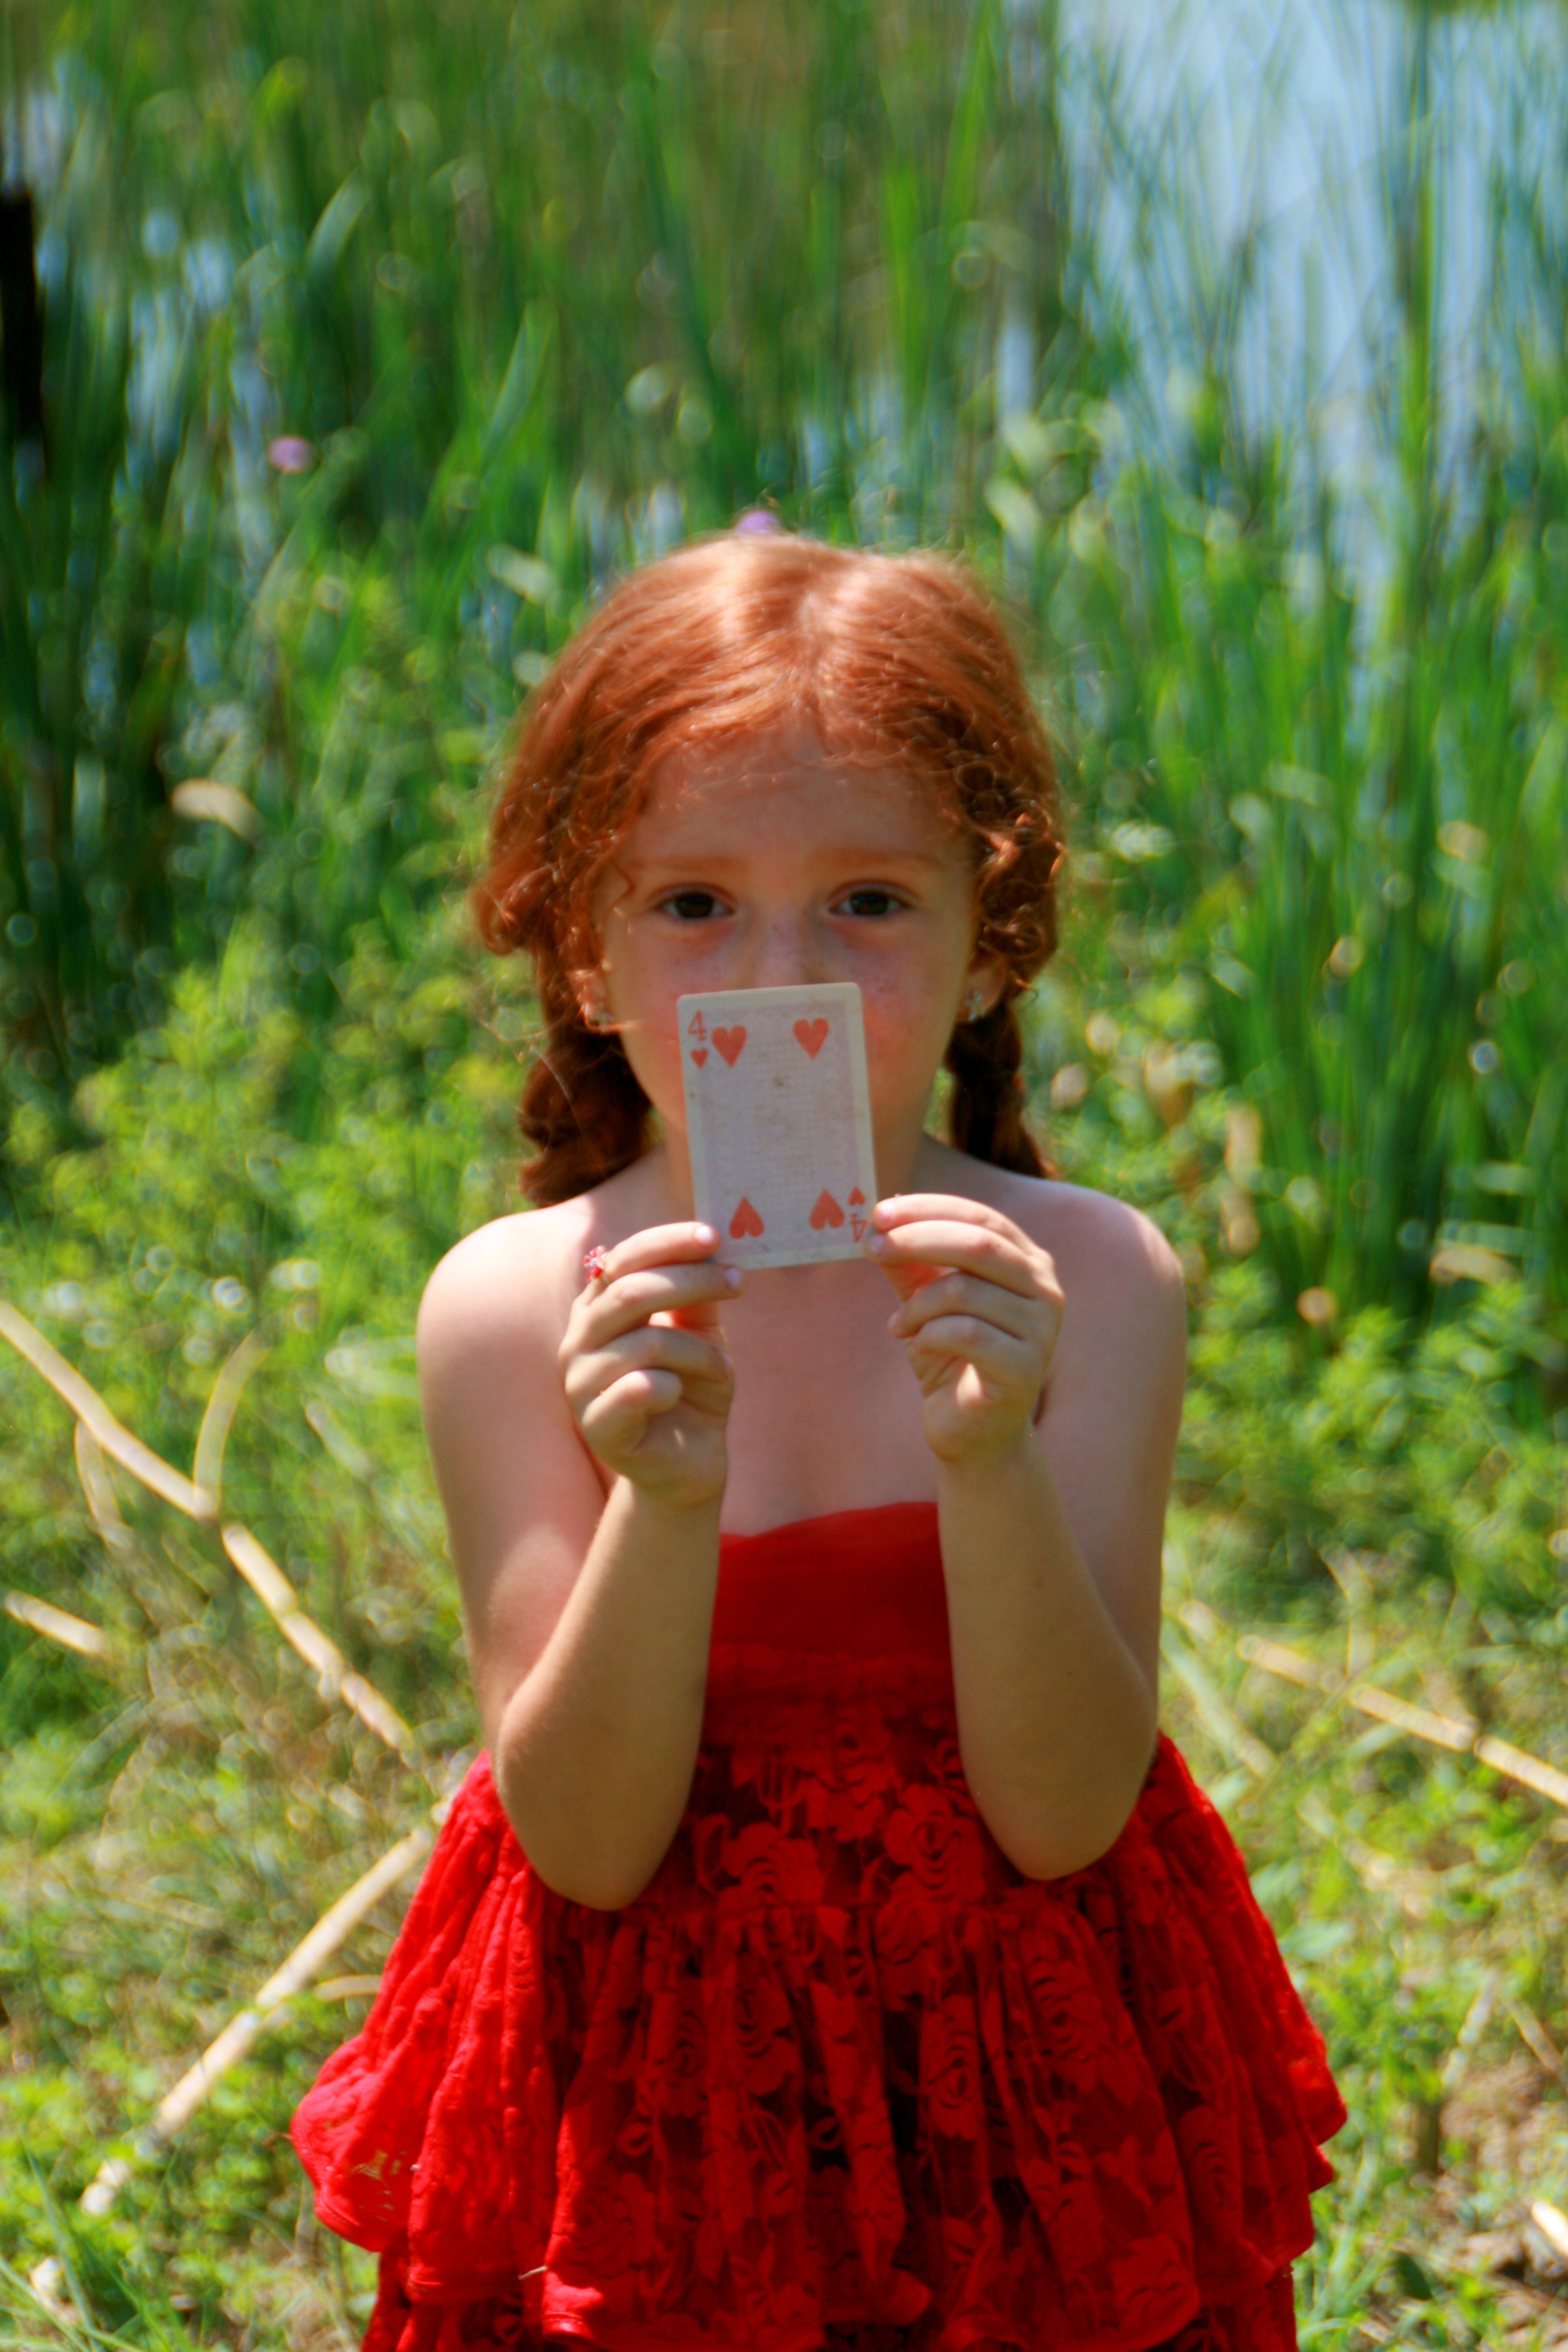 Girl holding a card photo